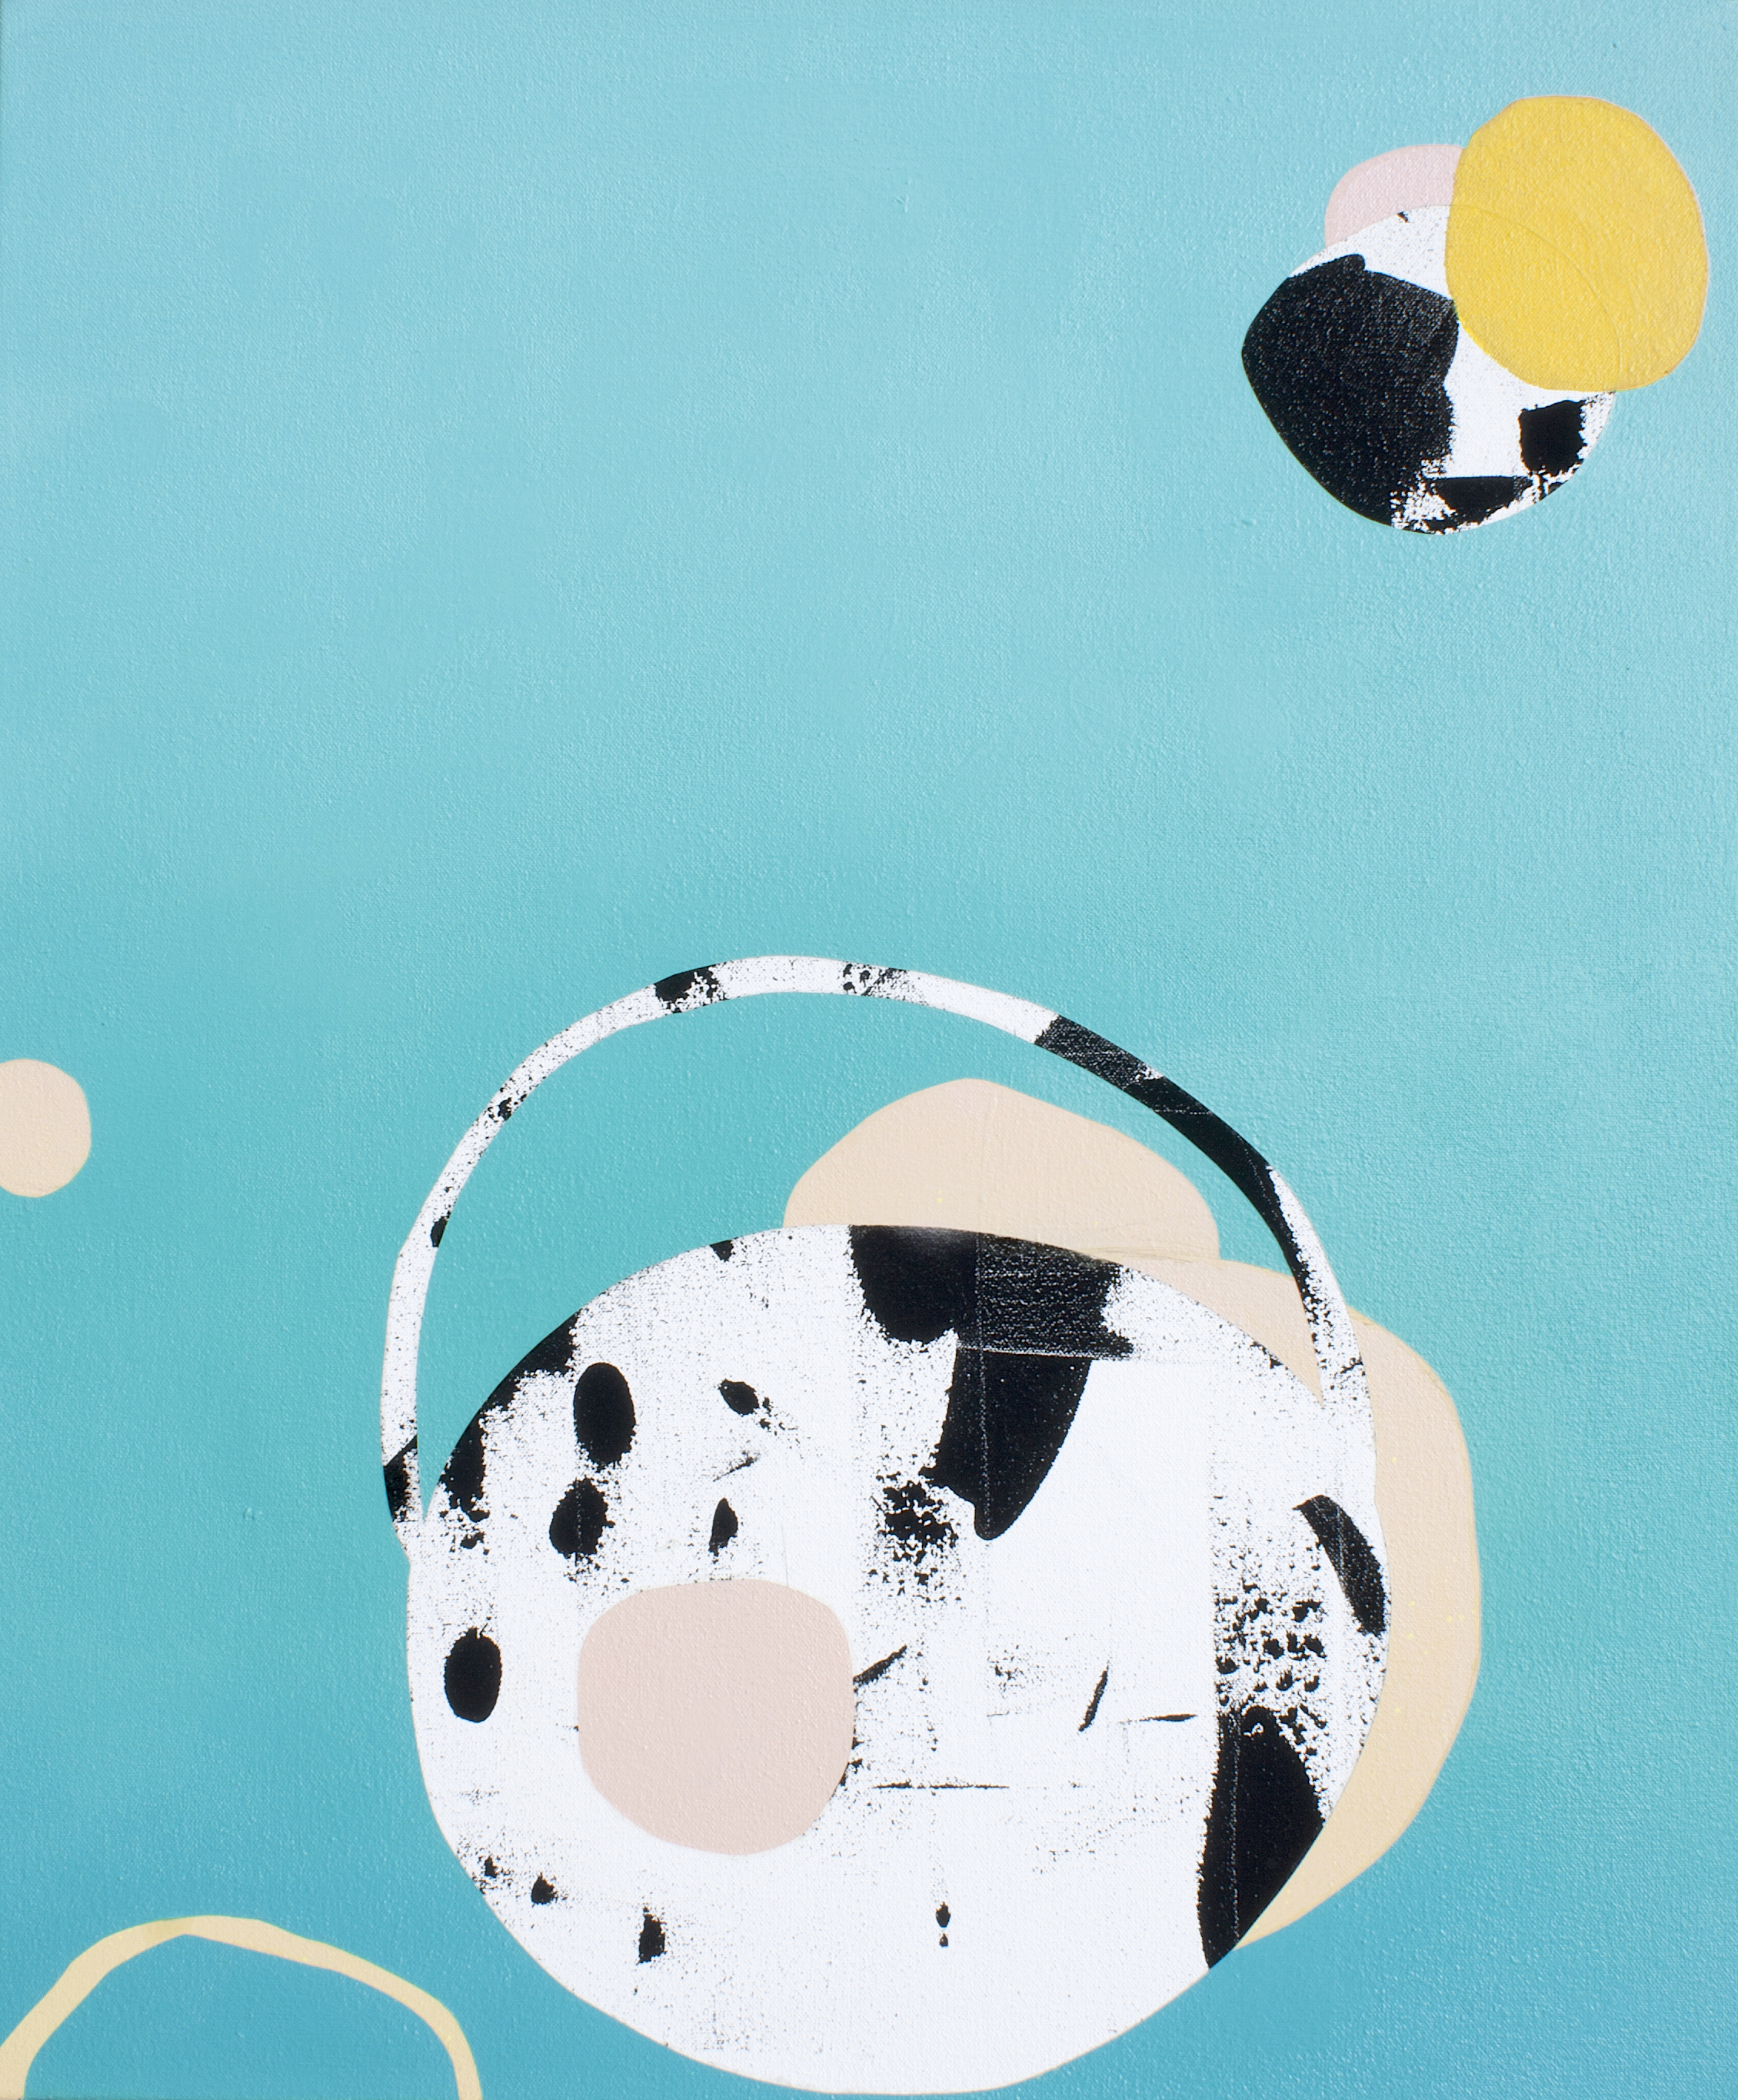   Bubble , 2019. Acrylic &amp; oil on canvas, 26 x 20 in.  